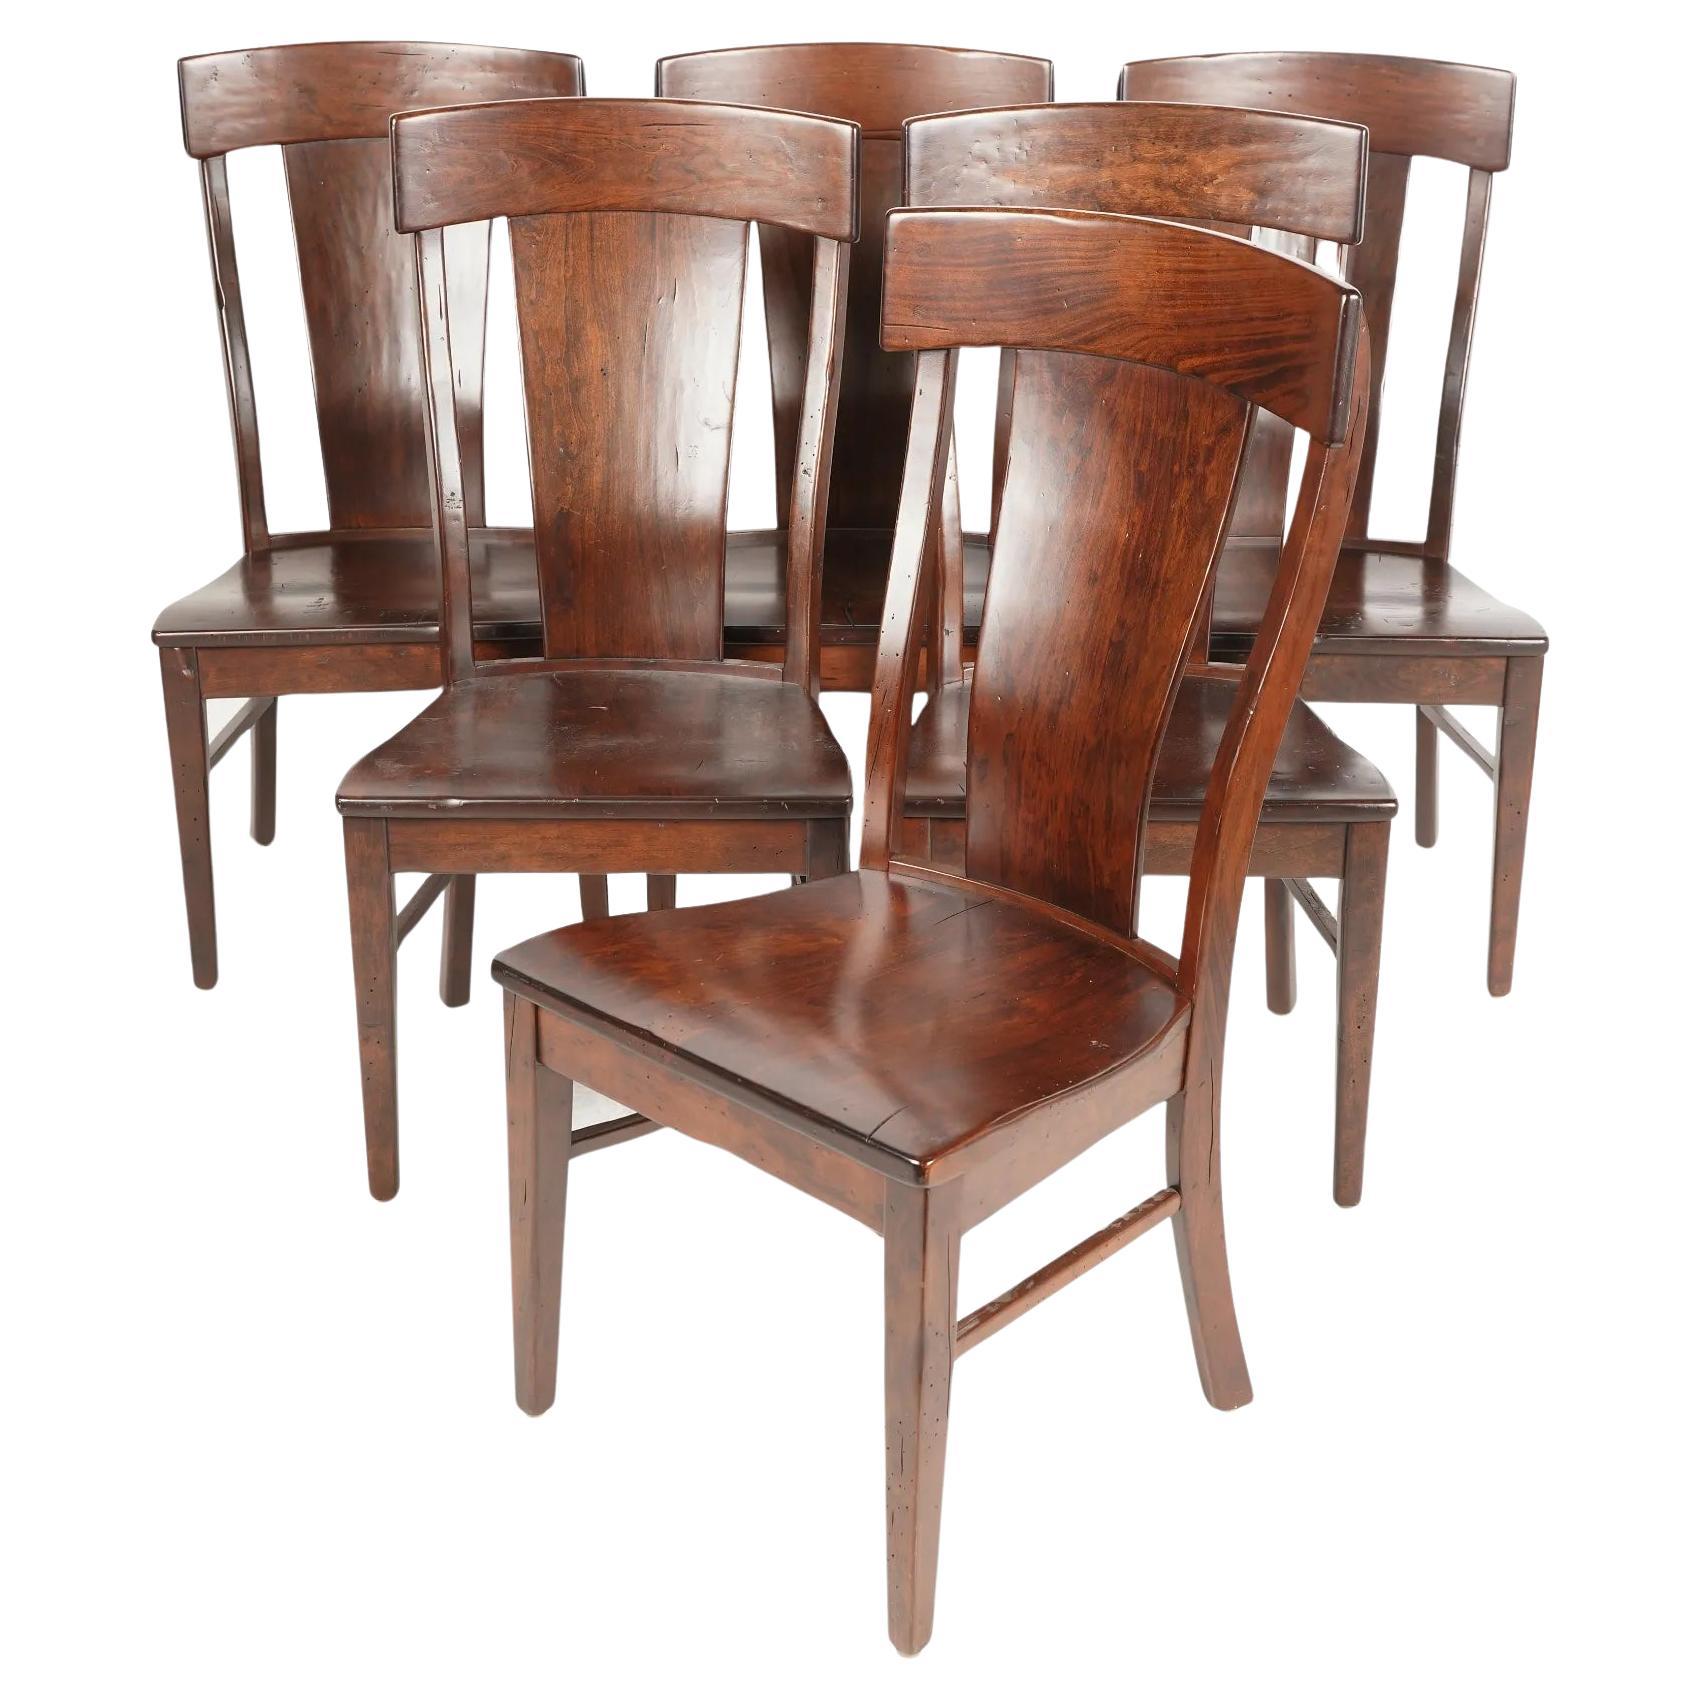 Set of 6 T Back Dining Chairs made by Simply Amish "Harlow" Model For Sale